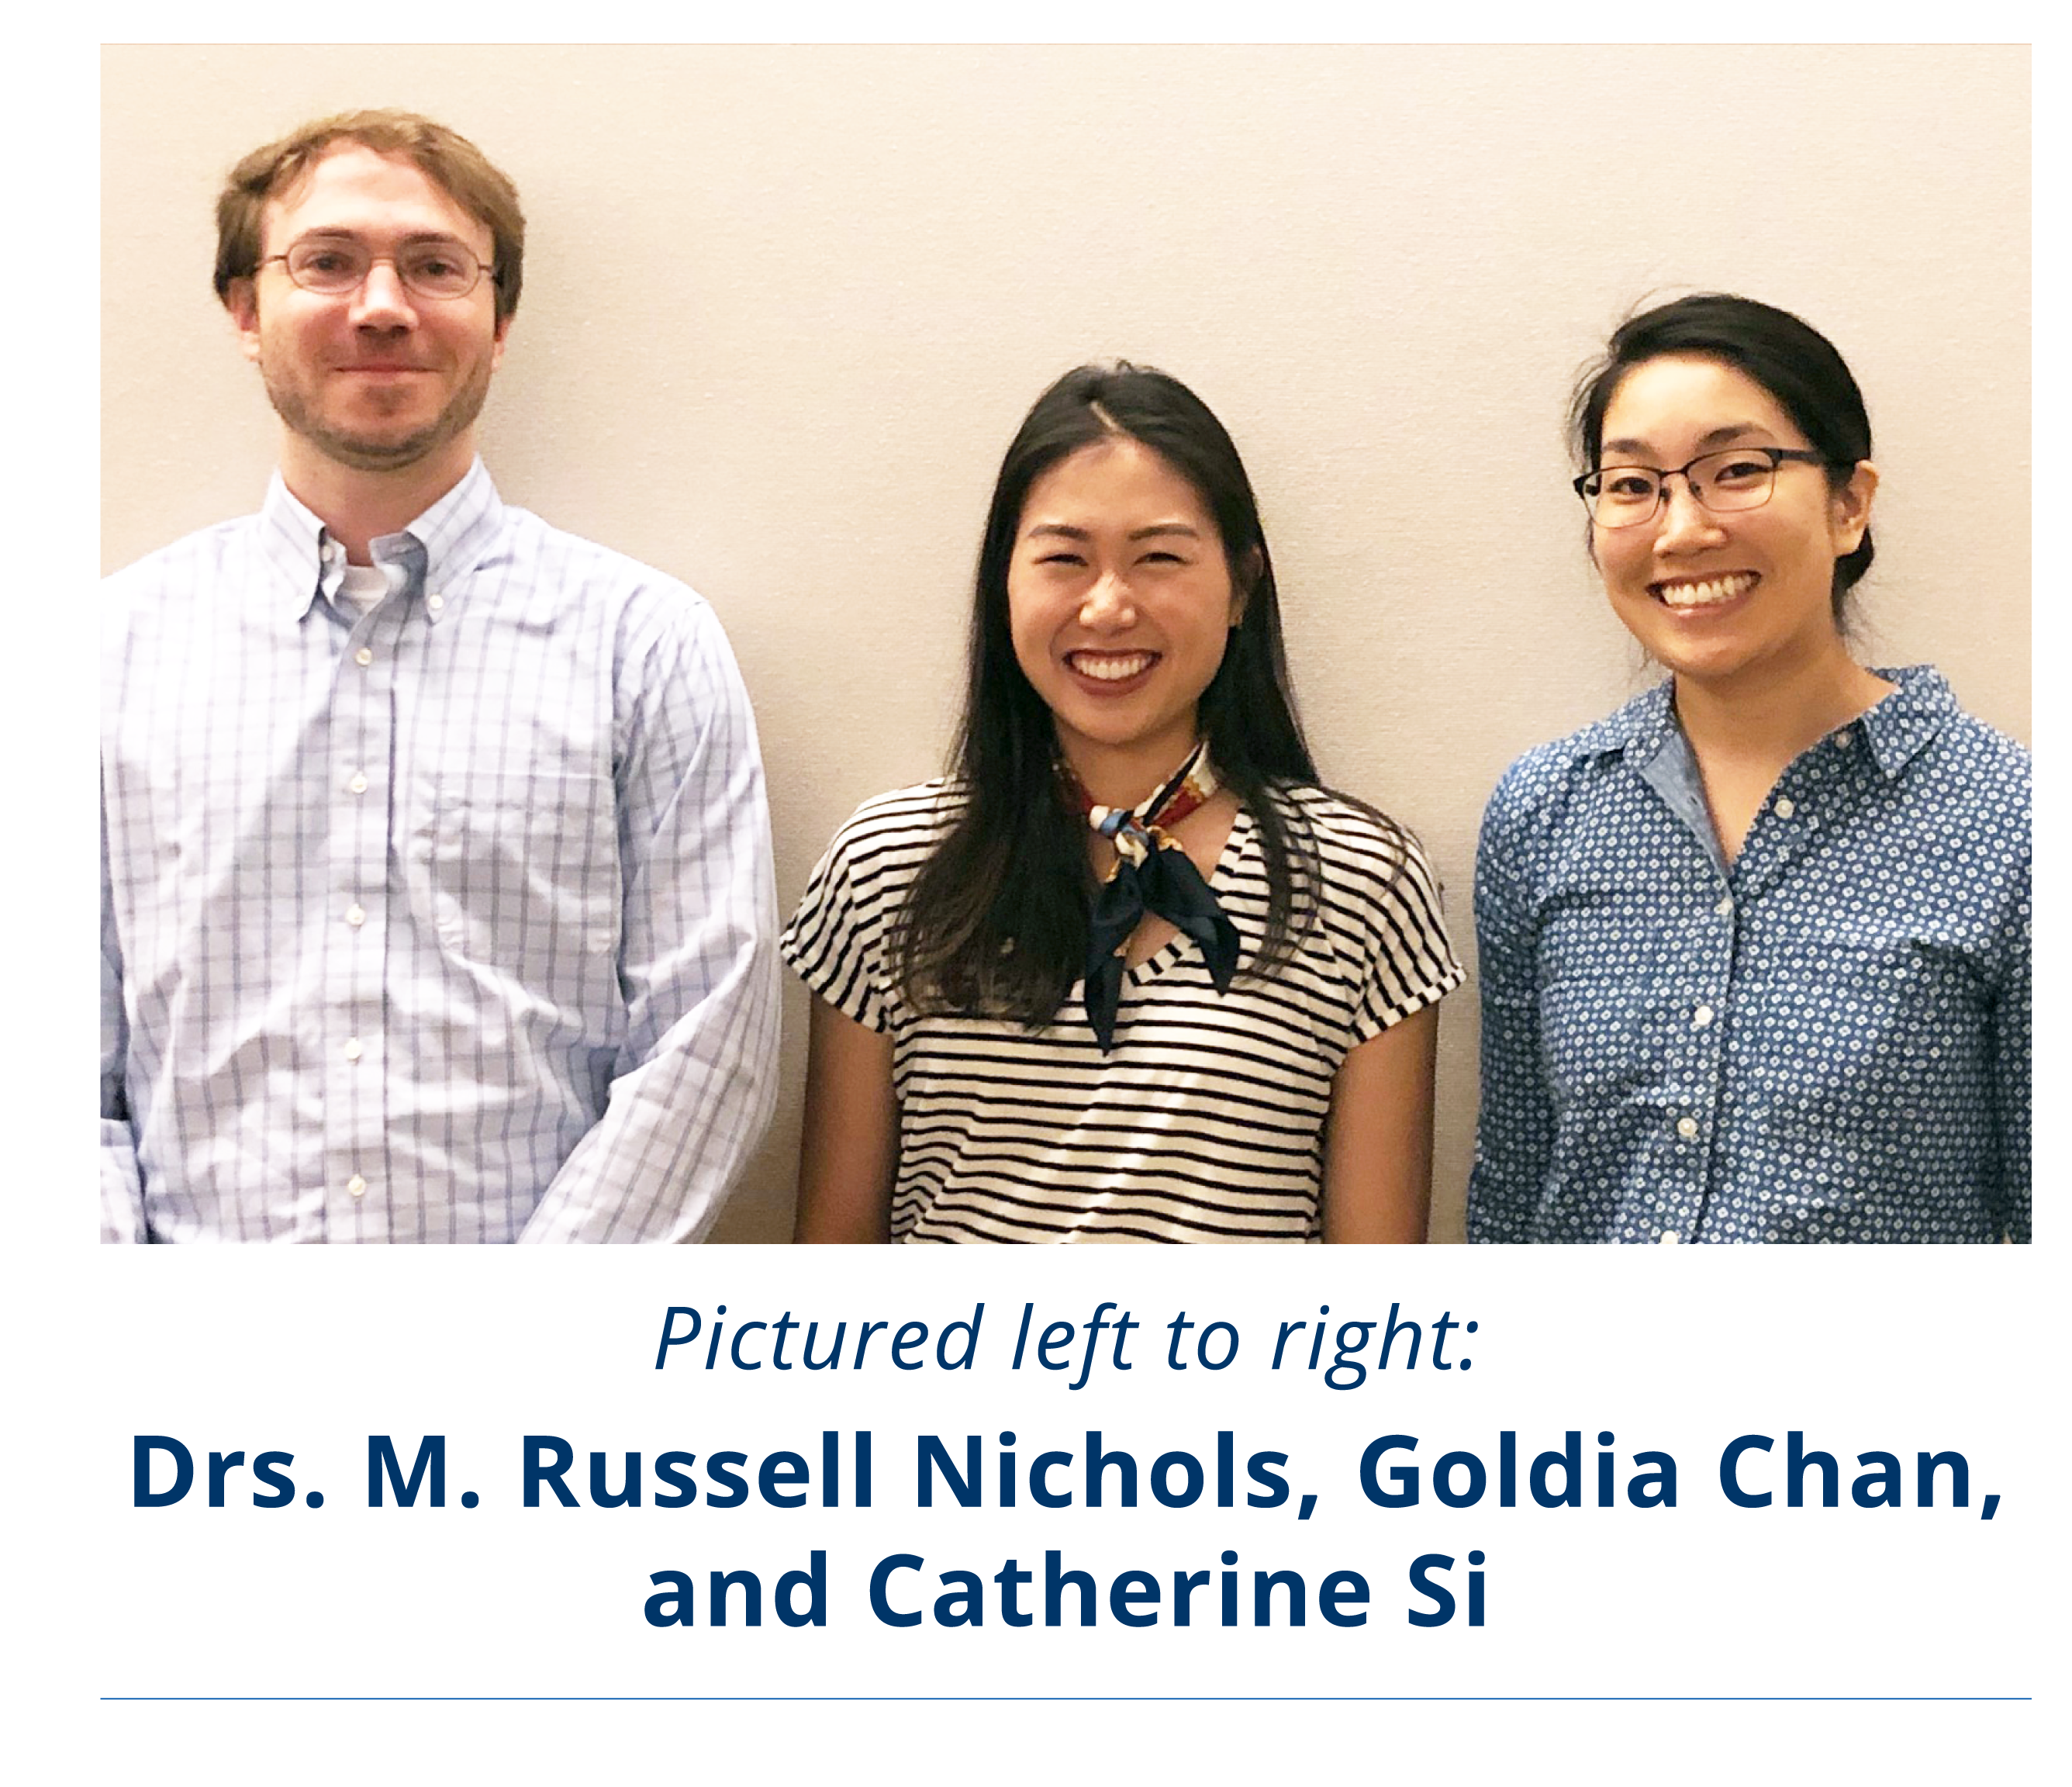 New 2019 ULAM Residents: Drs. M. Russell Nichols, Goldia Chan, and Catherine Si (pictured left to right)